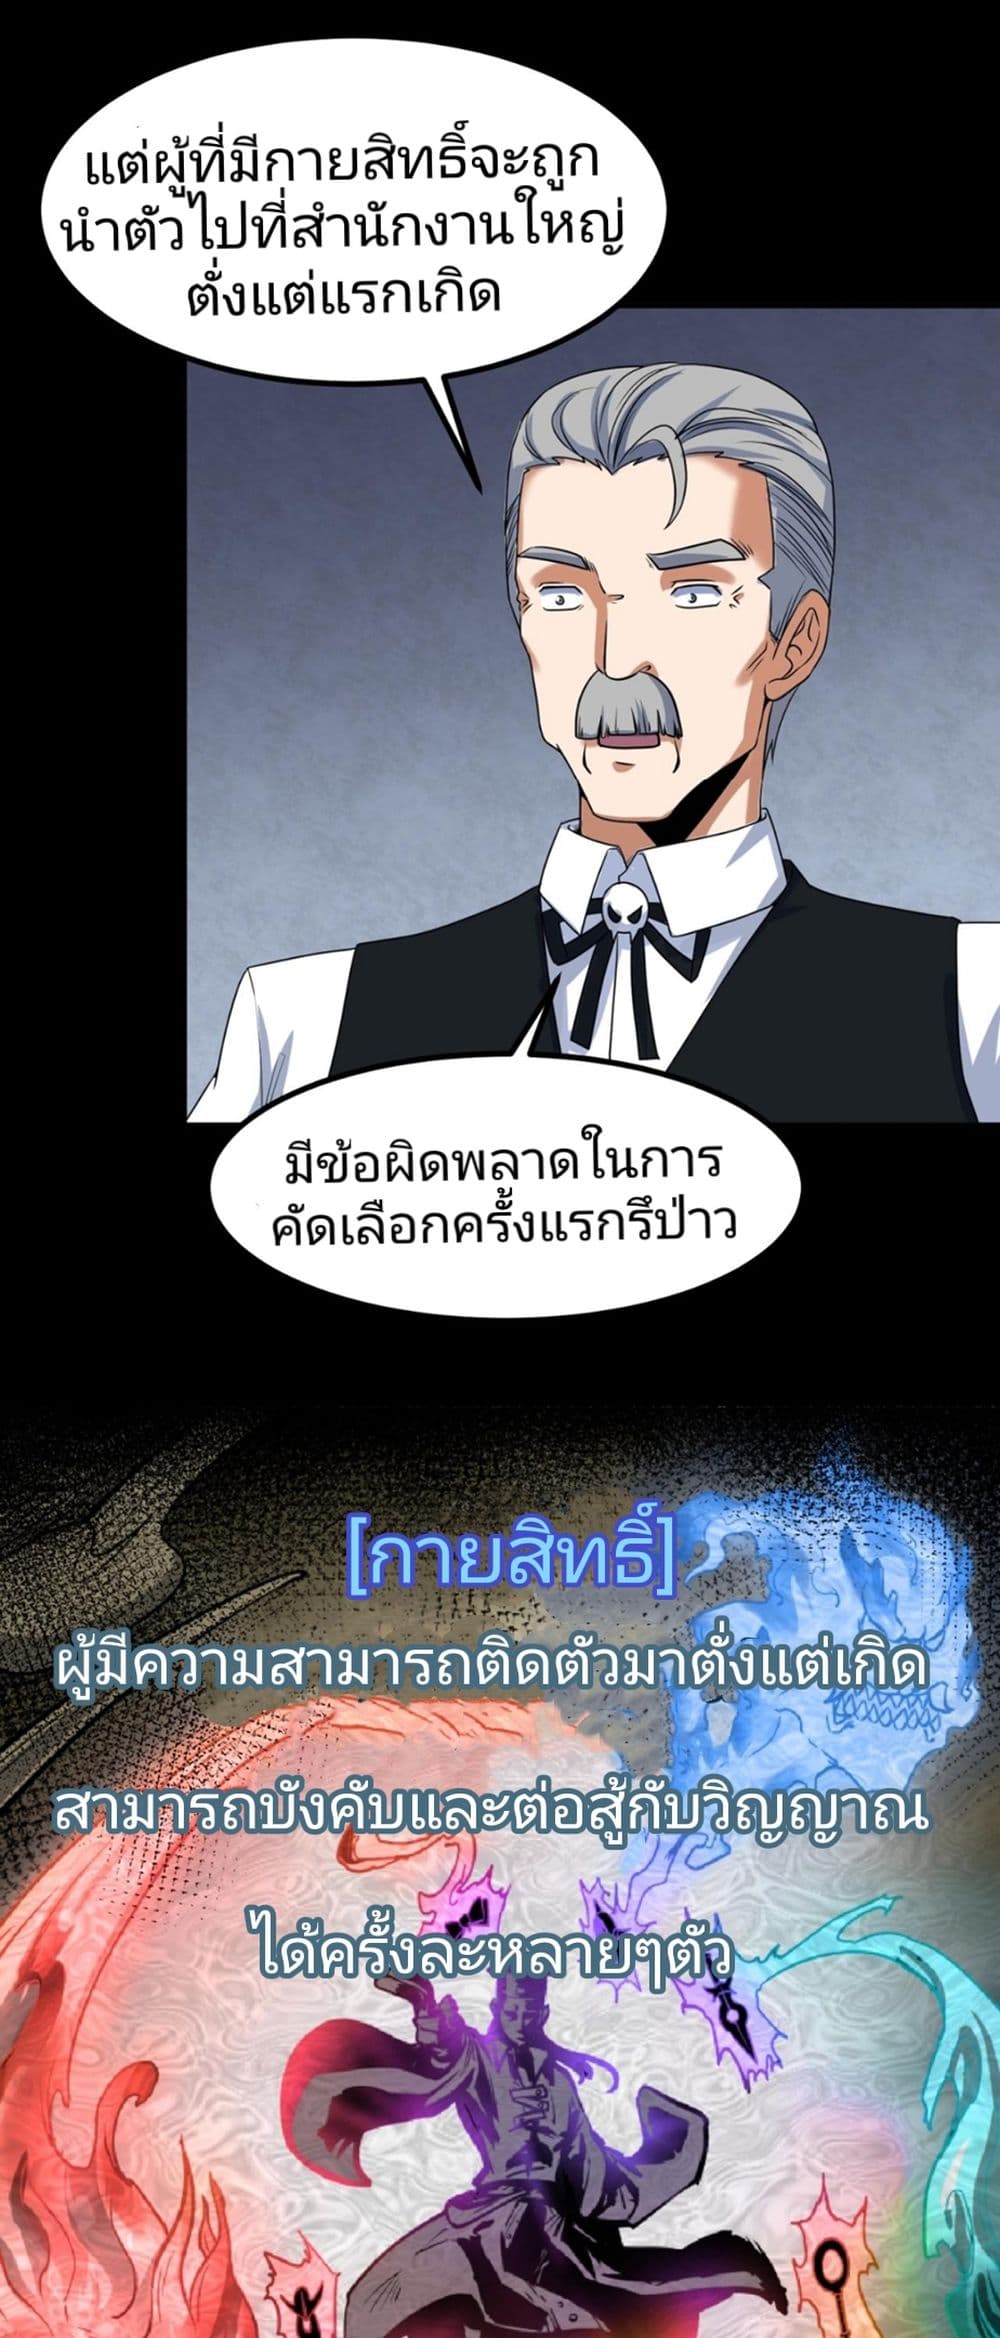 The Age of Ghost Spirits à¸à¸­à¸à¸à¸µà¹ 5 (36)